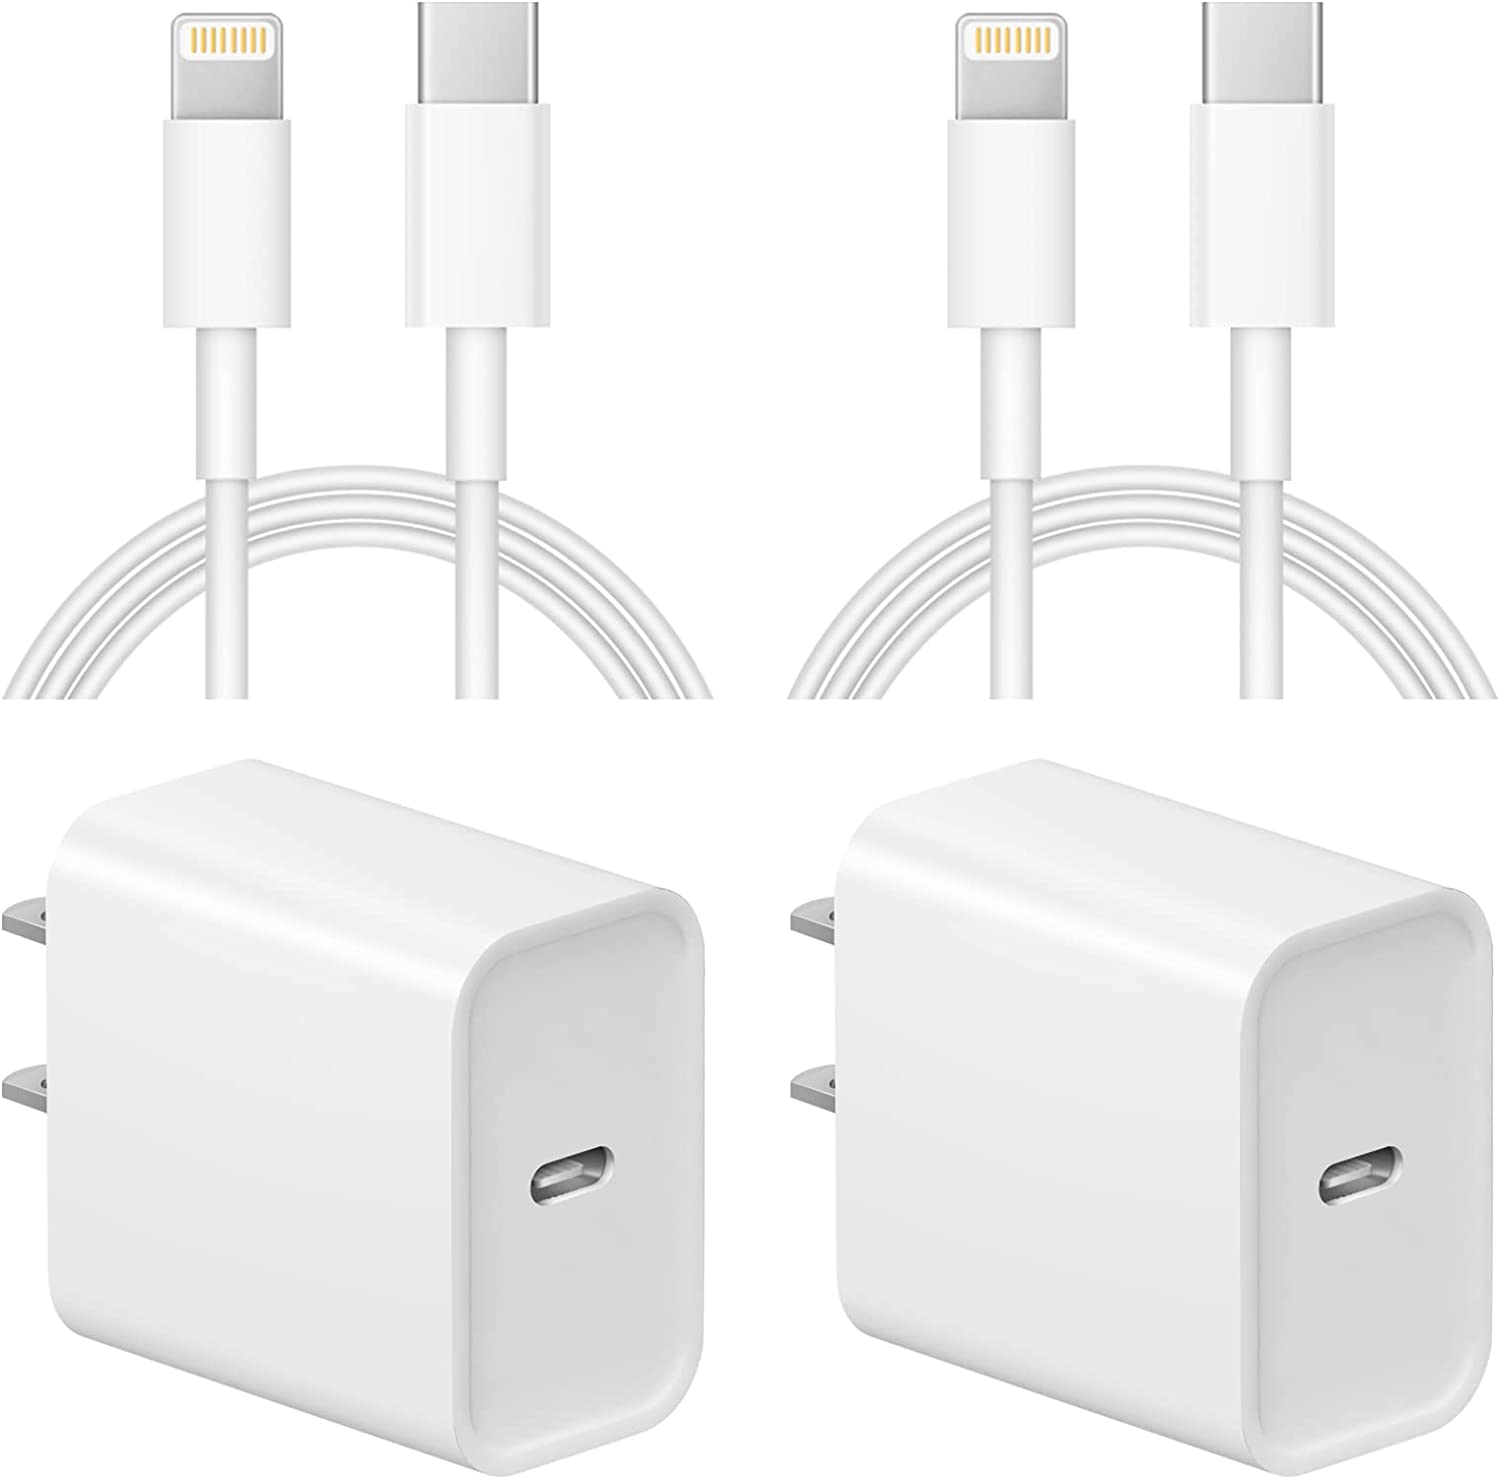 iPhone Charger Fast Charging, USB C 20W - Mundo Electronic